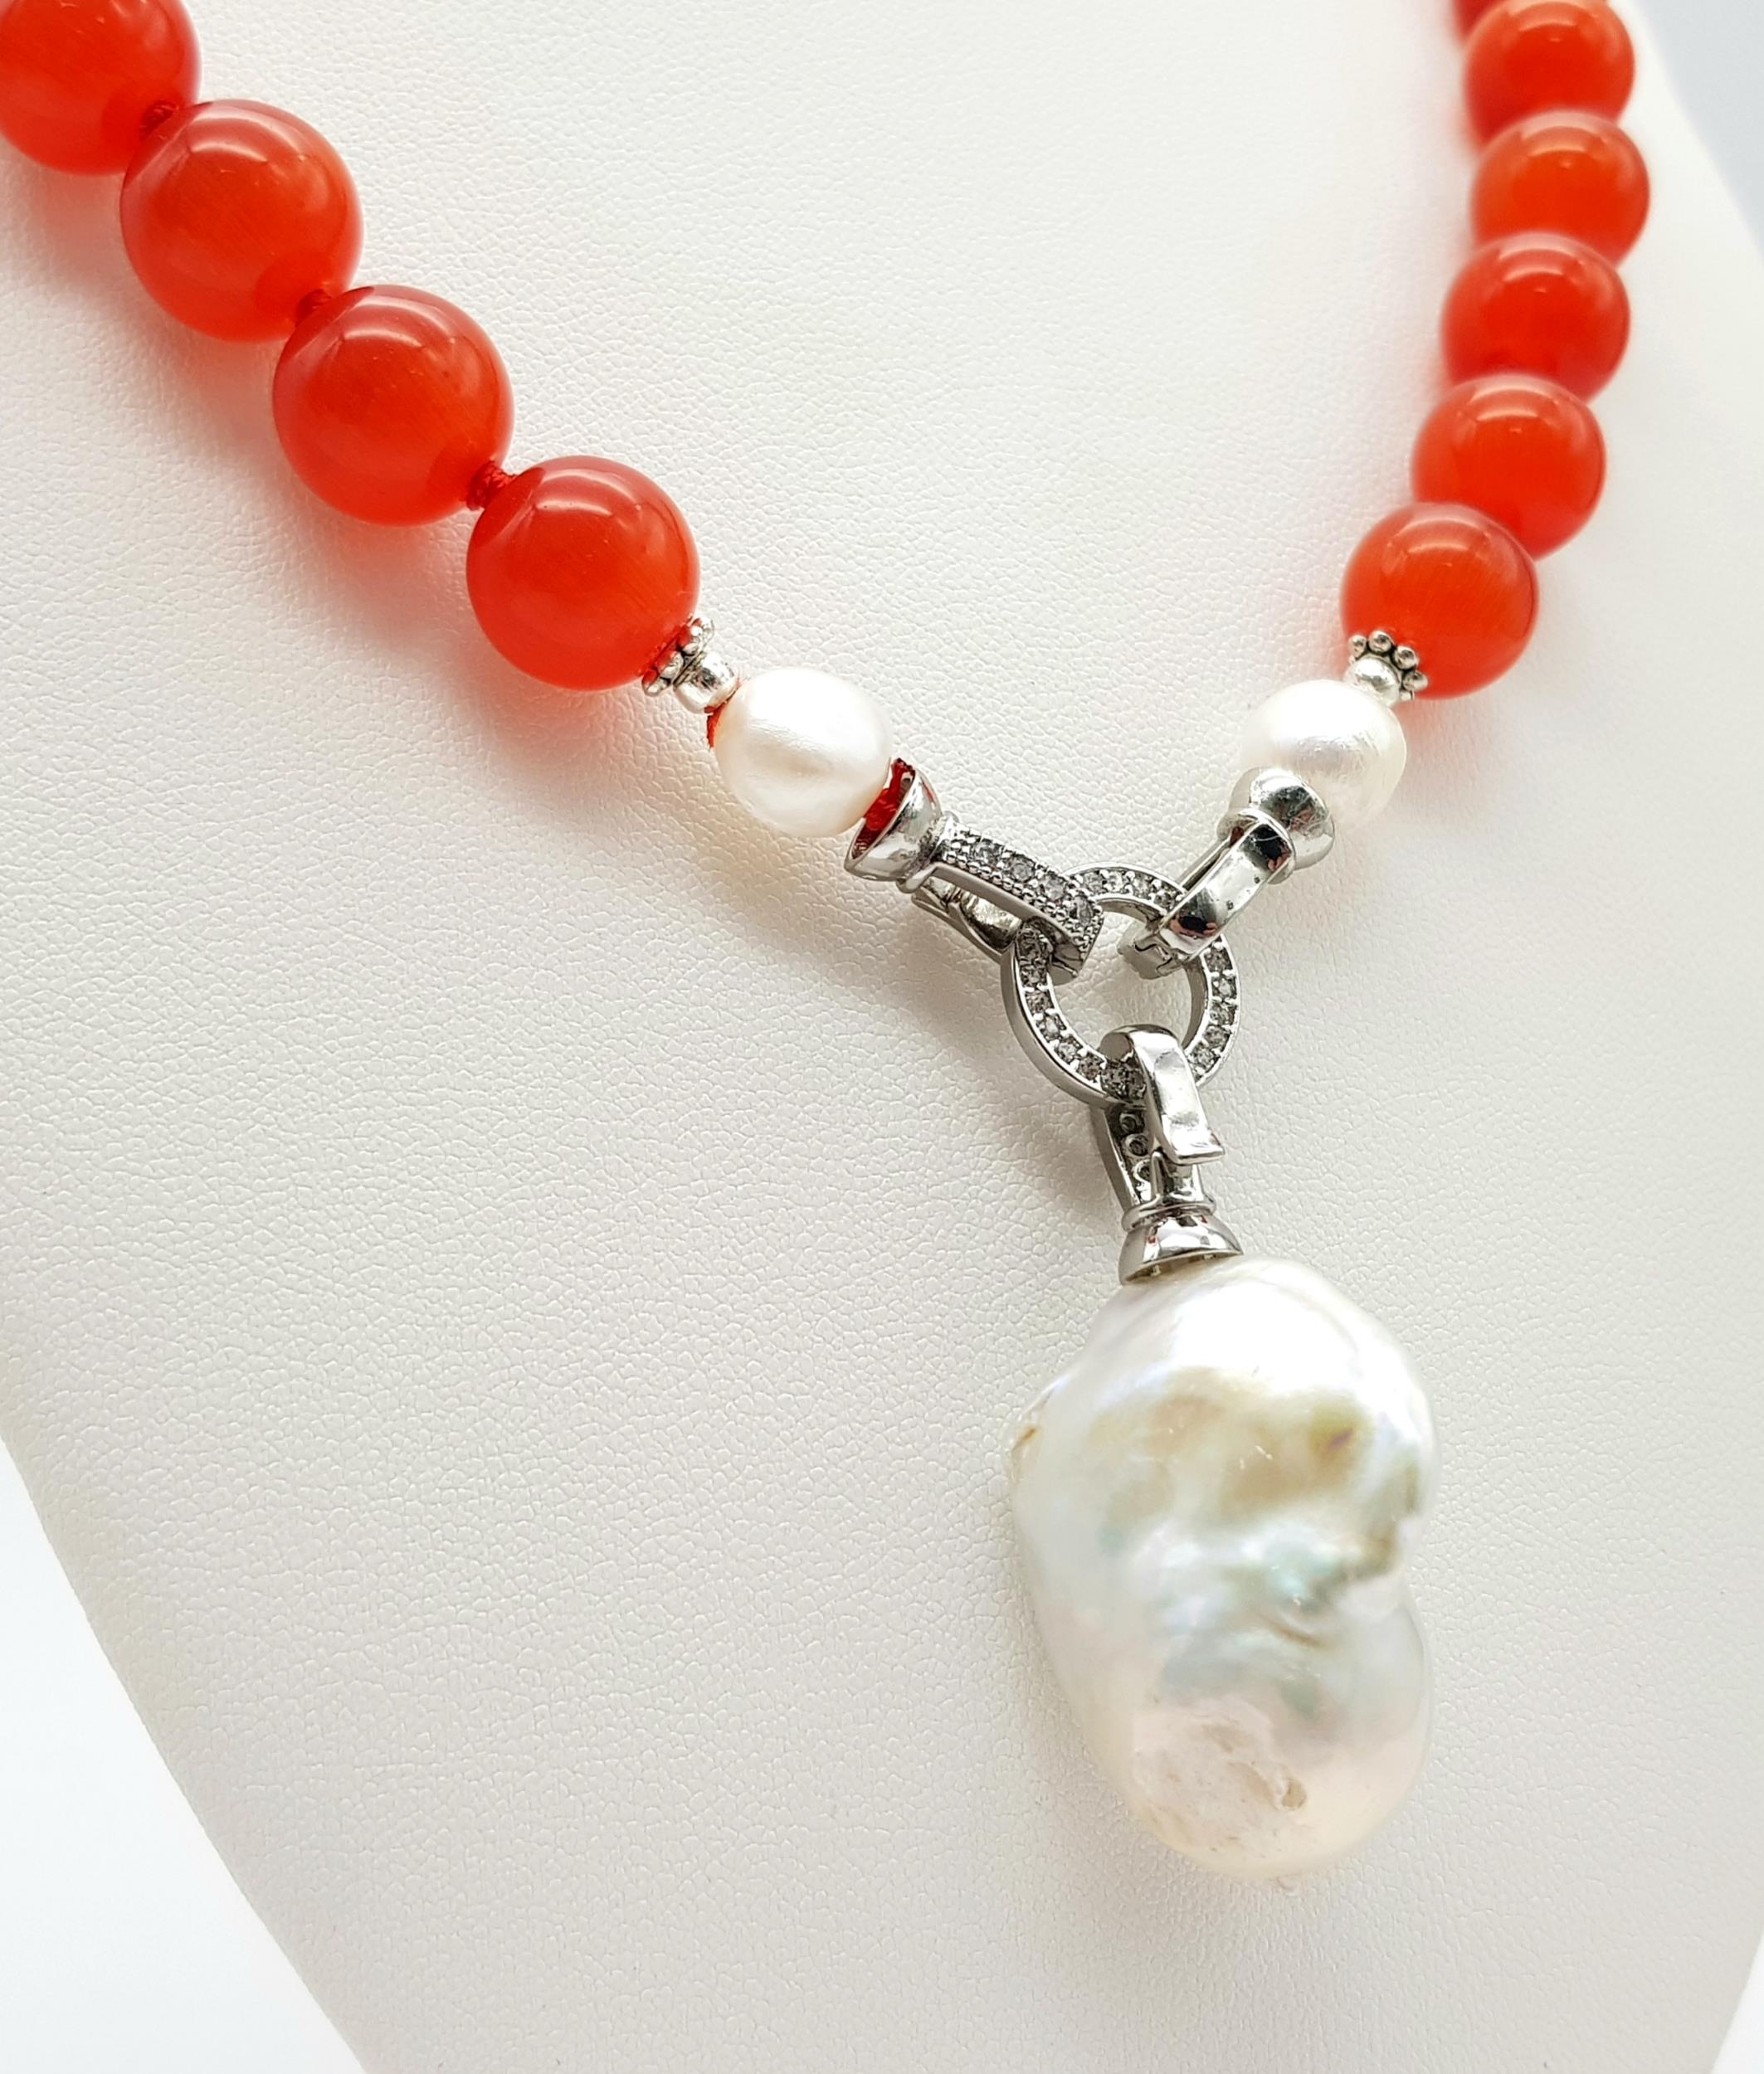 A Deep Orange Cat's Eye Beaded Necklace with a Hanging Keisha Baroque Pearl Pendant. 12mm beads. - Image 2 of 4